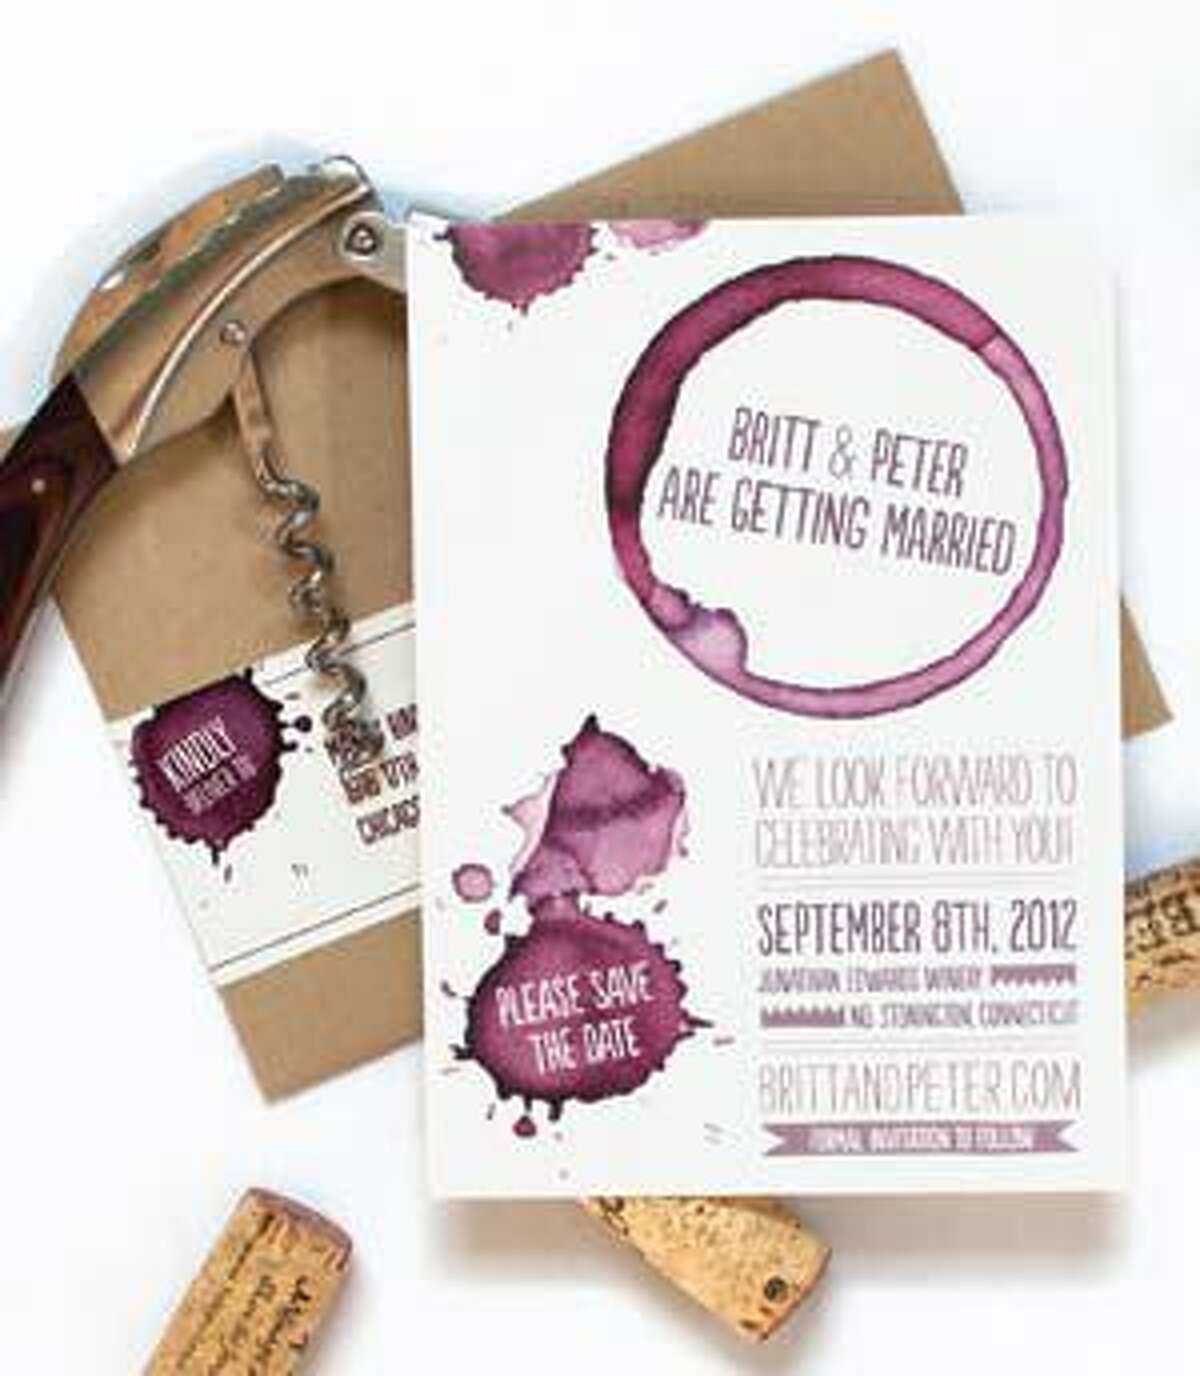 Save-the-date cards are an opportunity to set the tone for your wedding, such as this wine-stained card for a vineyard wedding from CoralPheasant.com